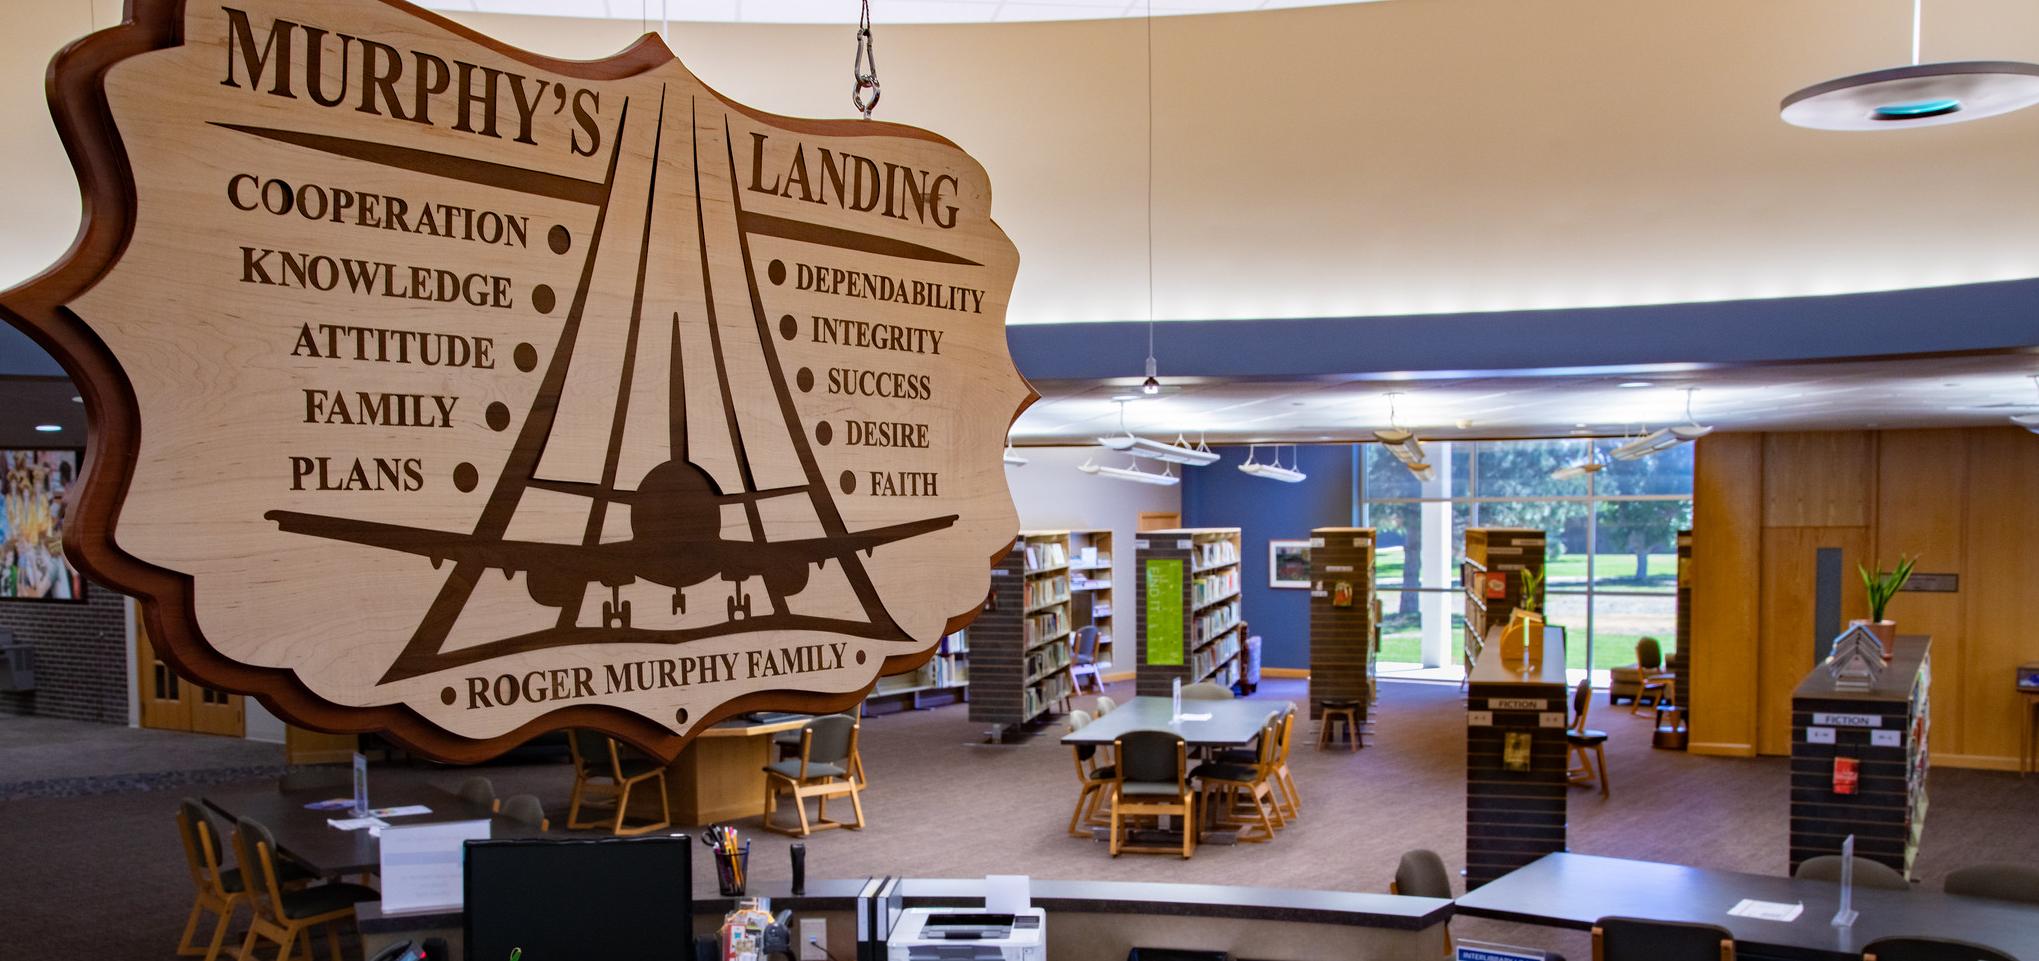 Murphy's Landing sign in the Barton Library